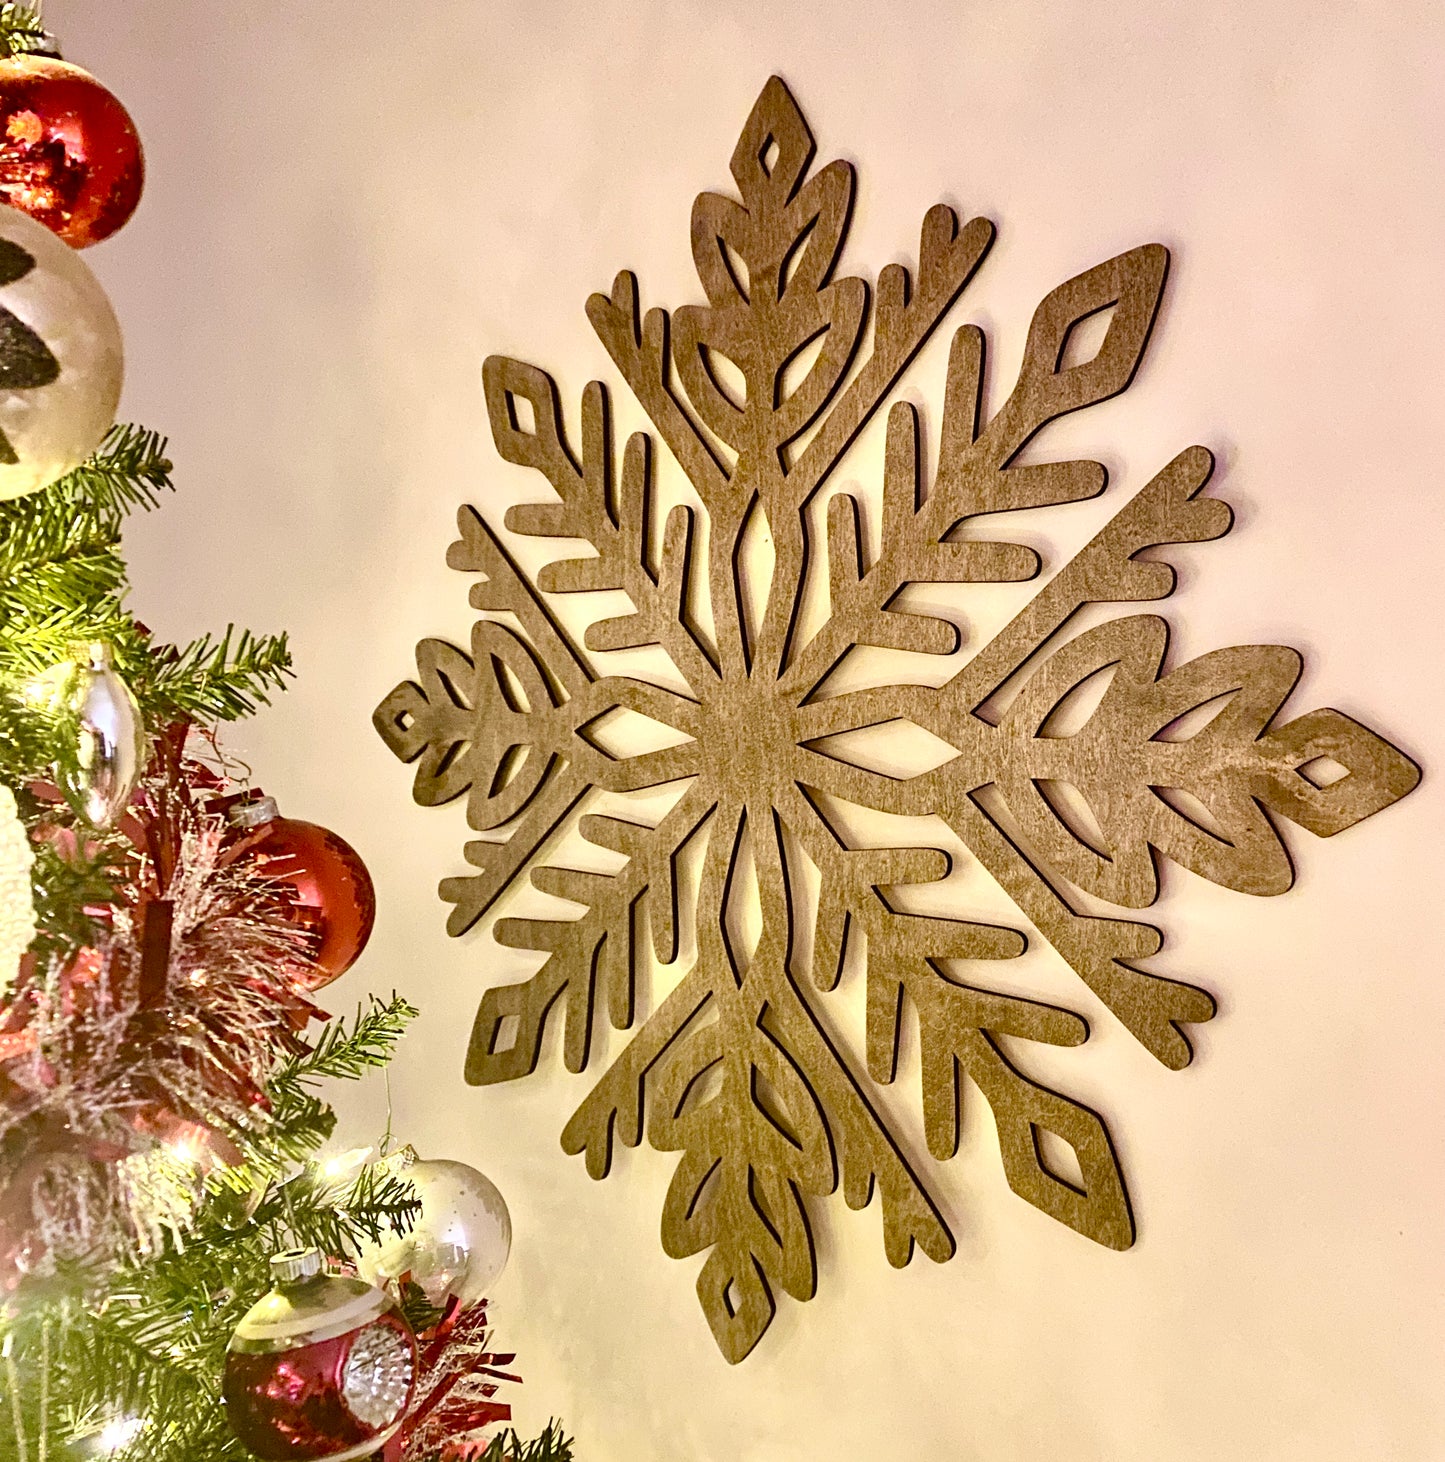 35” Large Snowflake Cut Out Wall Hanging